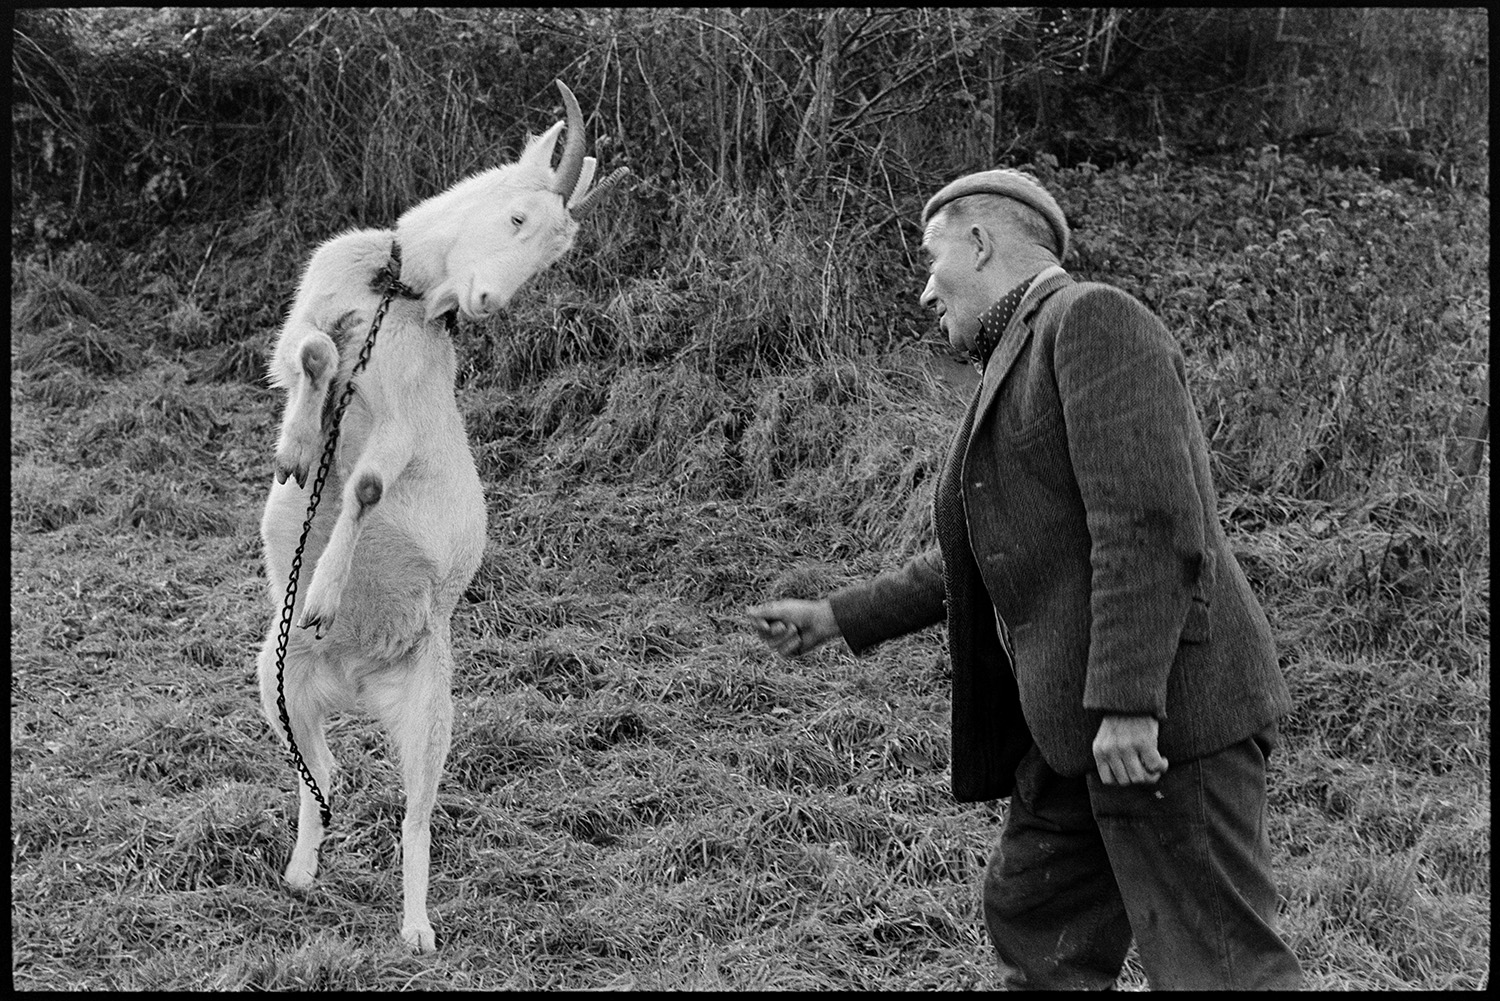 Farmer playing with goat!!!!! 
[Frank Pickard playing with a tethered goat at Millhams, Dolton.]